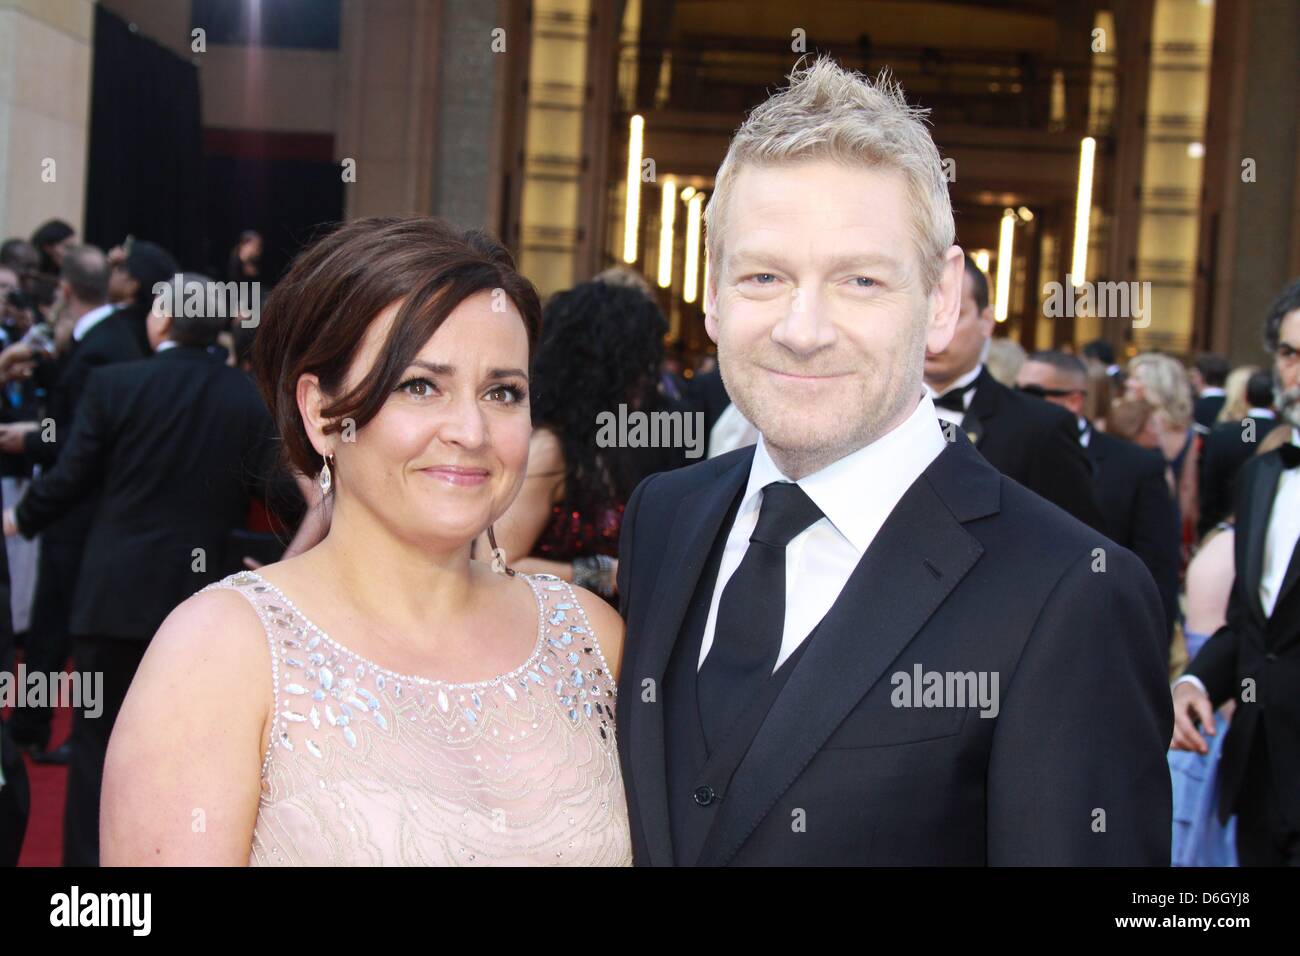 British actor Kenneth Branagh and wife Lindsay Brunnock arrive at the 84th Annual Academy Awards aka Oscars at Kodak Theatre in Los Angeles, USA, on 26 February 2012. Photo: Hubert Boesl Stock Photo